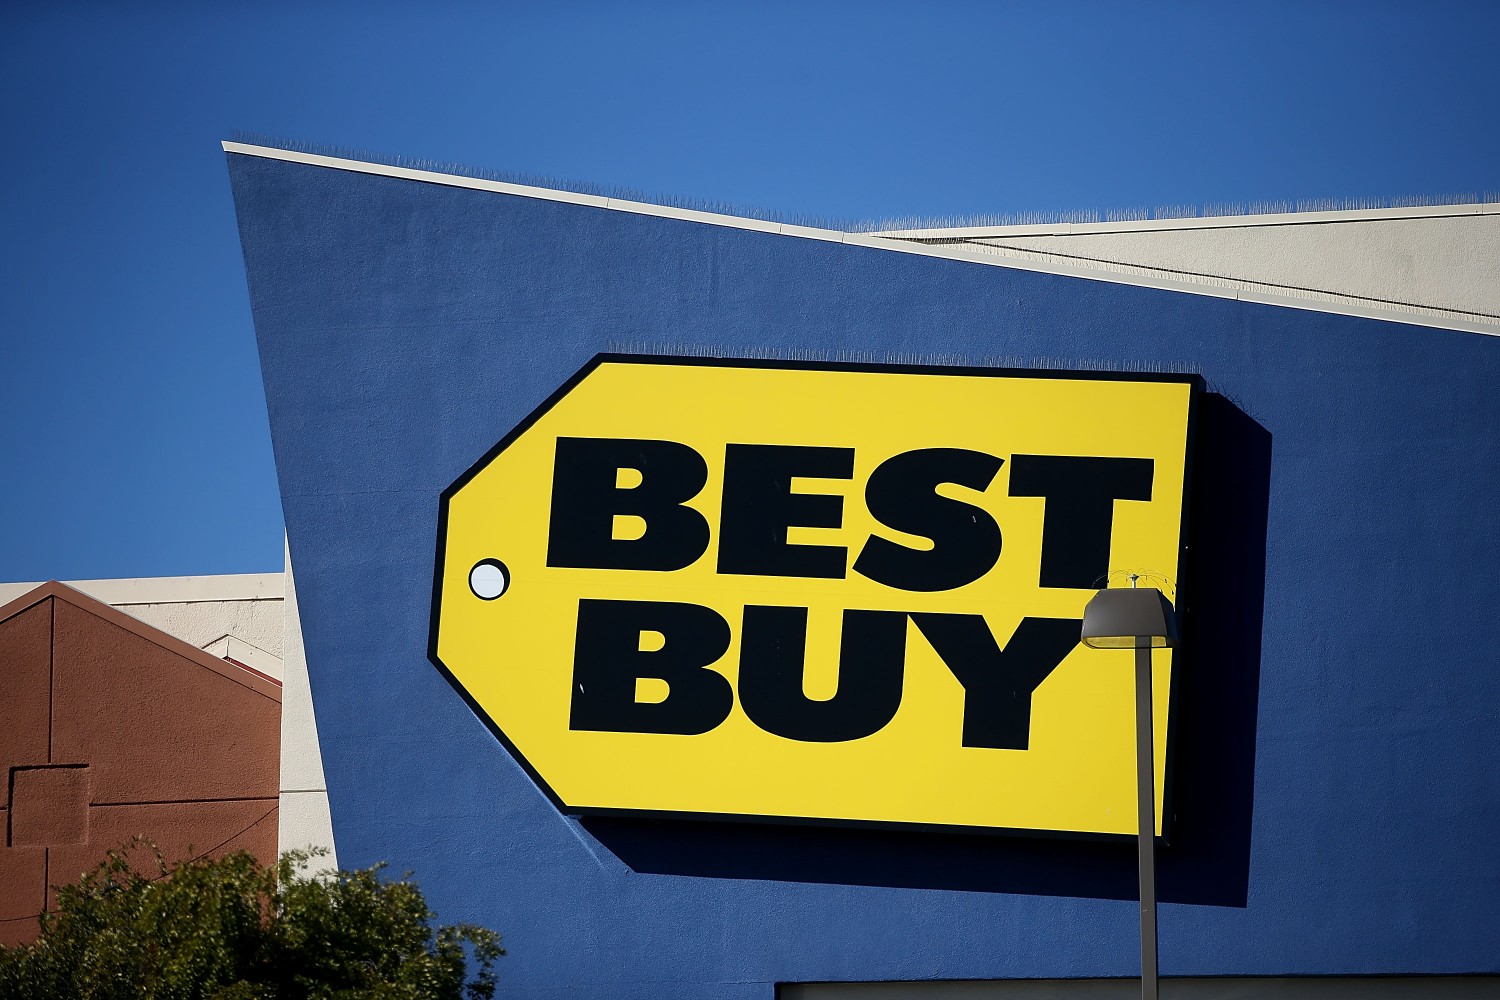 Best Buy is having a massive Fourth of July sale on TVs and appliances